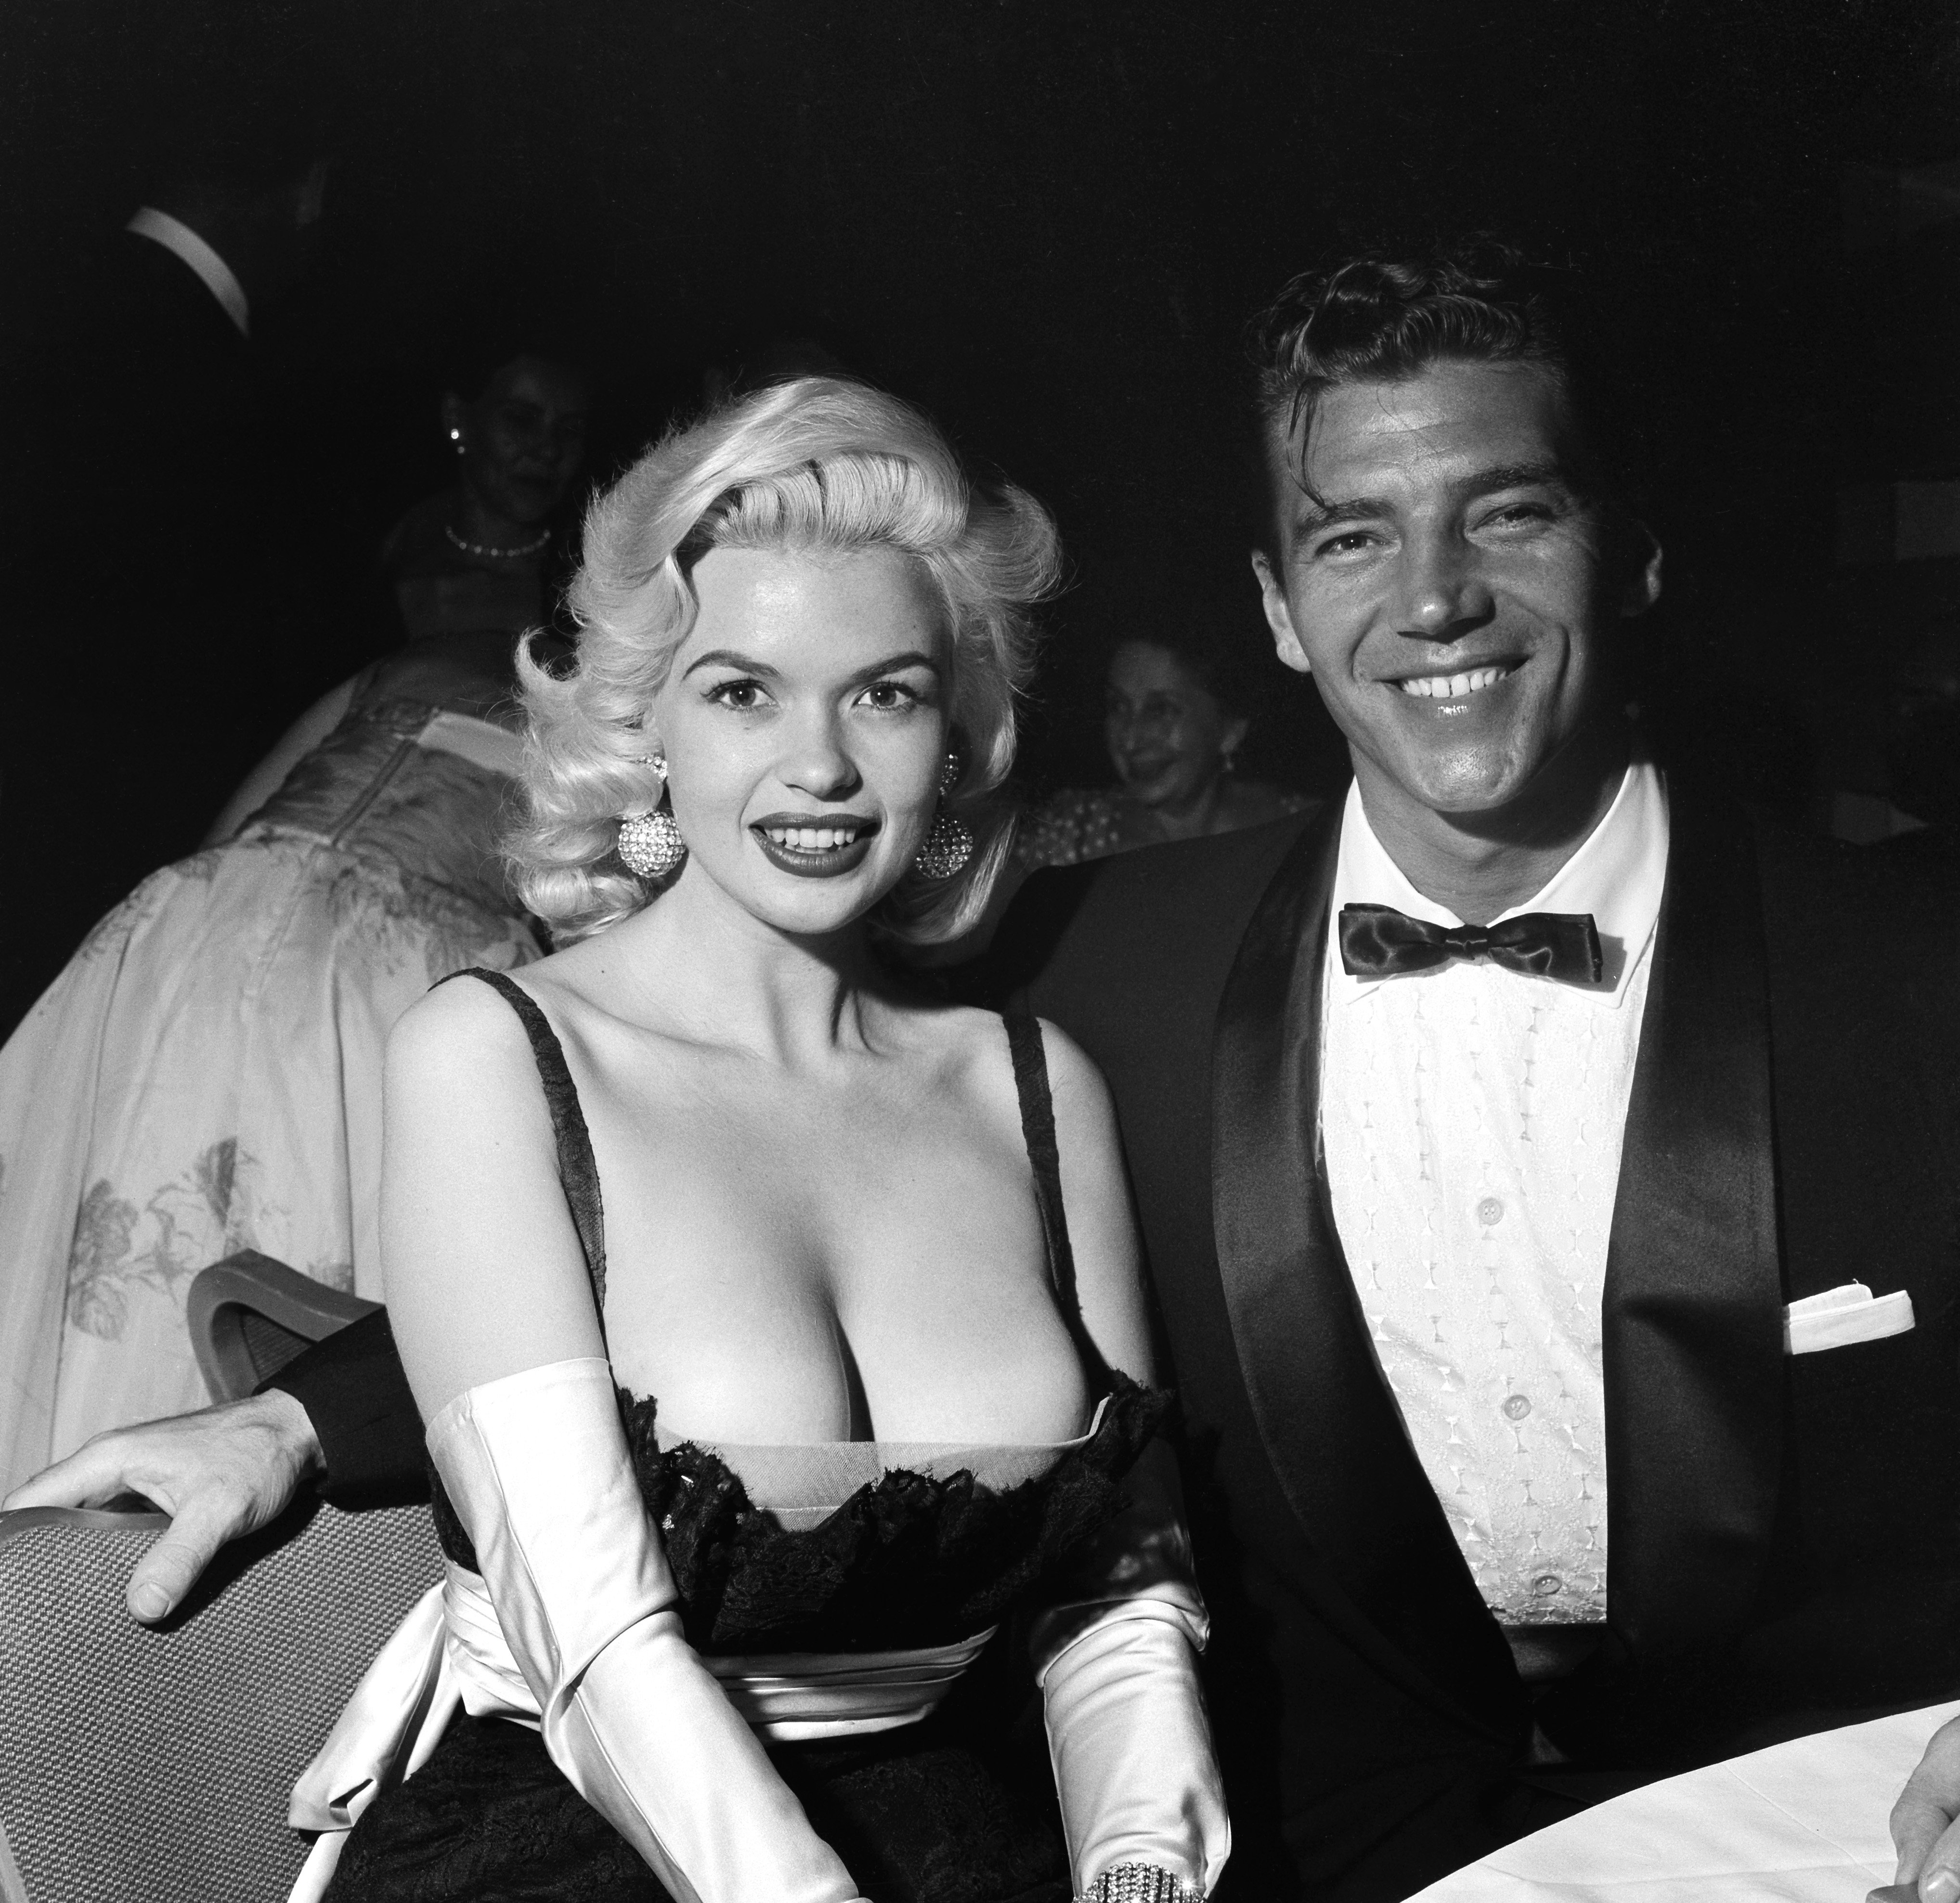 Actress Jayne Mansfield and Mickey Hargitay attend the Makeup Artist Ball in Los Angeles,California. | Source: Getty Images